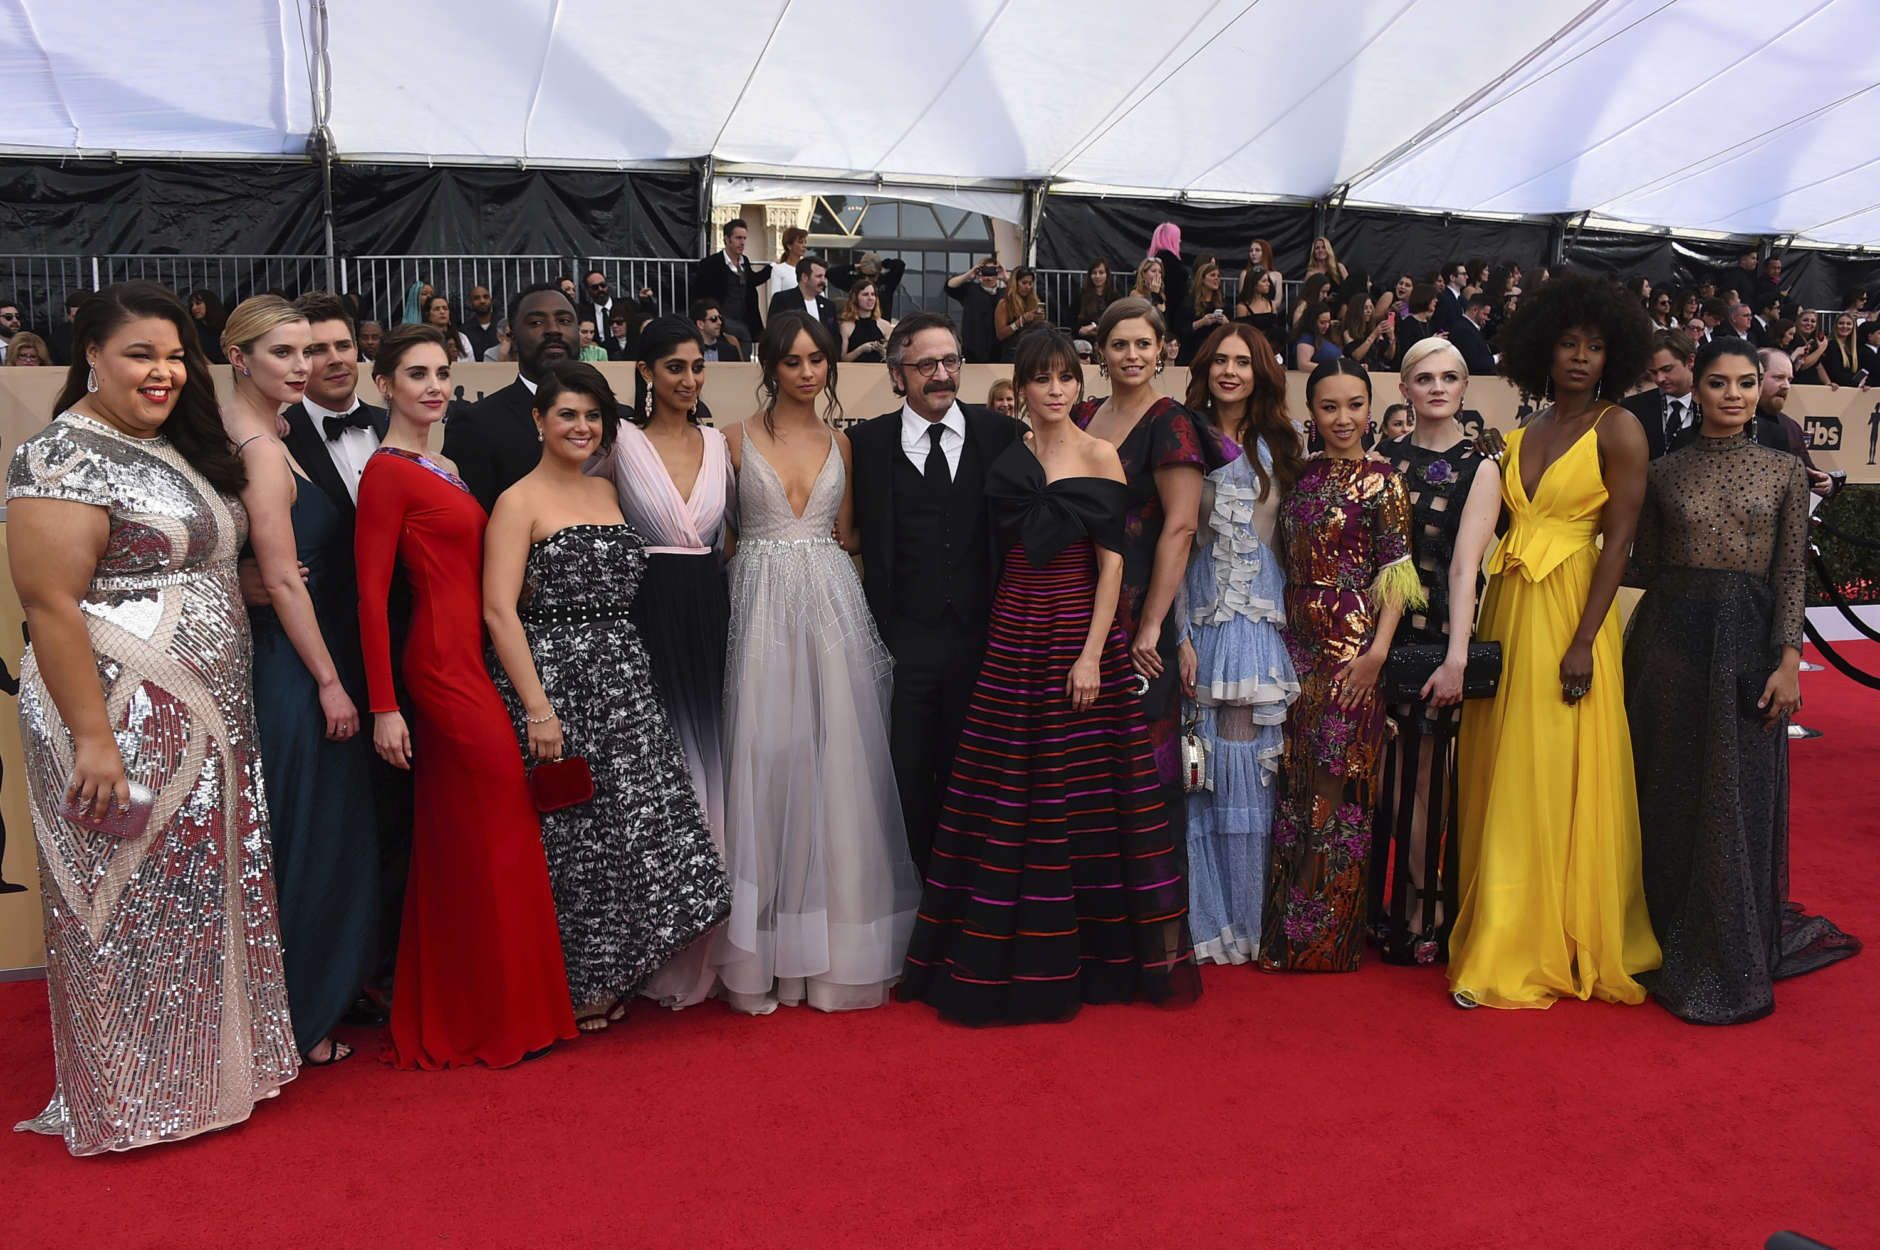 The cast of "Glow" arrives at the 24th annual Screen Actors Guild Awards at the Shrine Auditorium &amp; Expo Hall on Sunday, Jan. 21, 2018, in Los Angeles. (Photo by Jordan Strauss/Invision/AP)